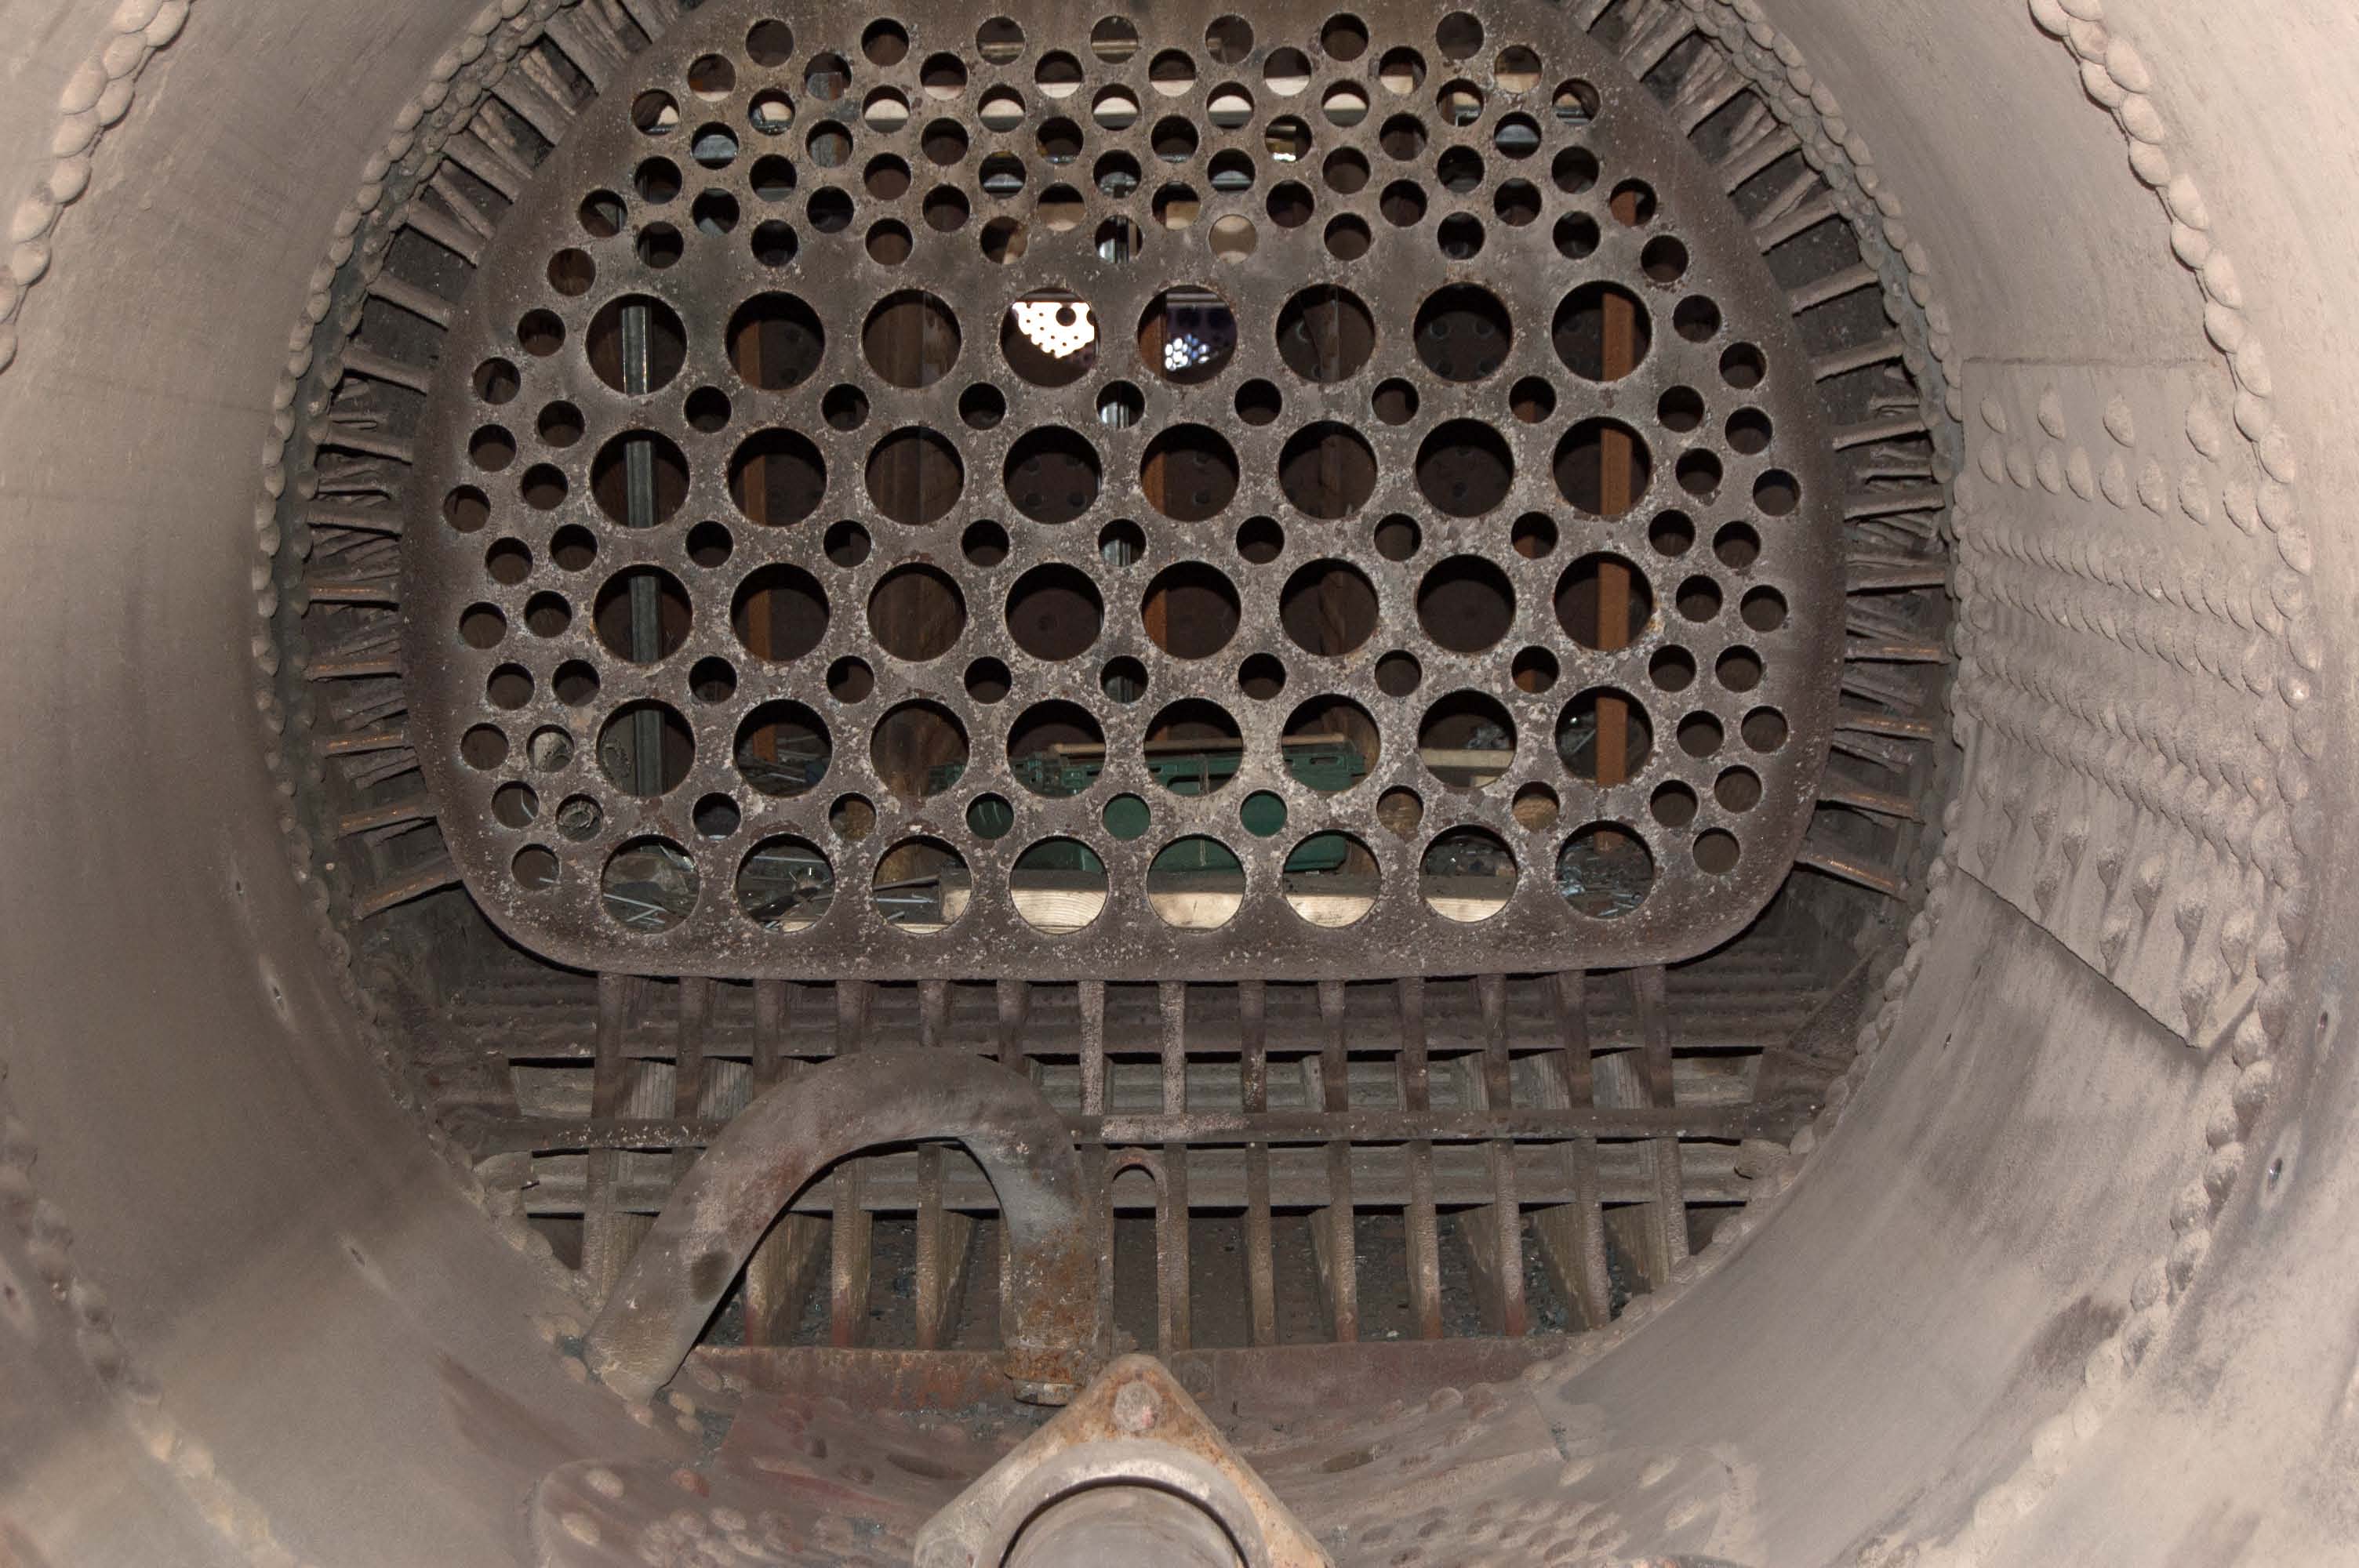 The water side of the rear tubeplate, showing the firebox staying